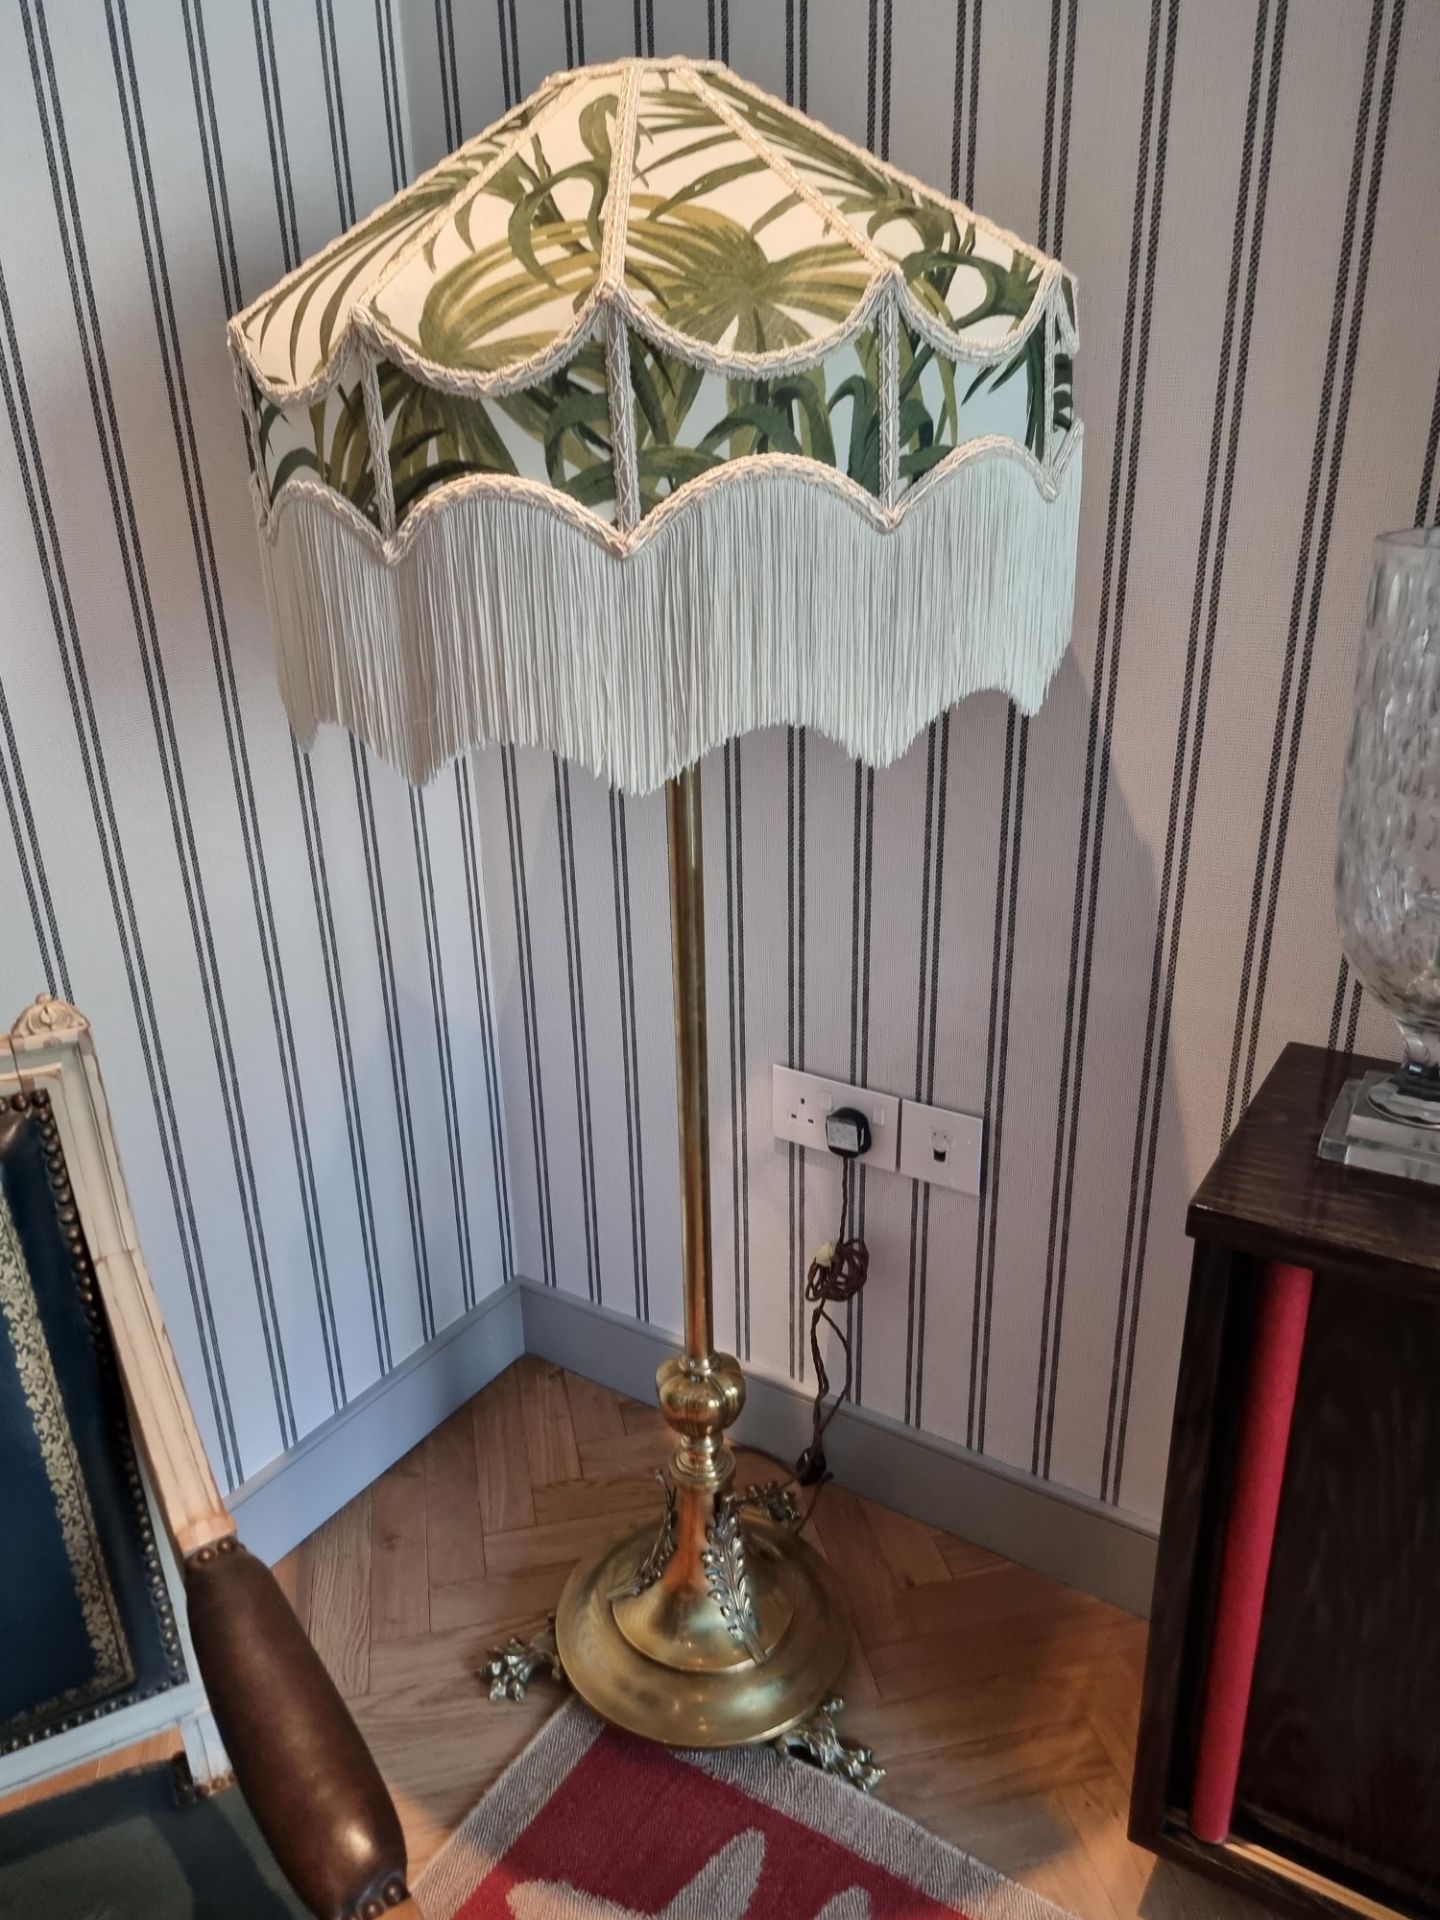 Edwardian Standard Lamp Elevate Your Space With An Exquisite Antique Brass Edwardian Standard